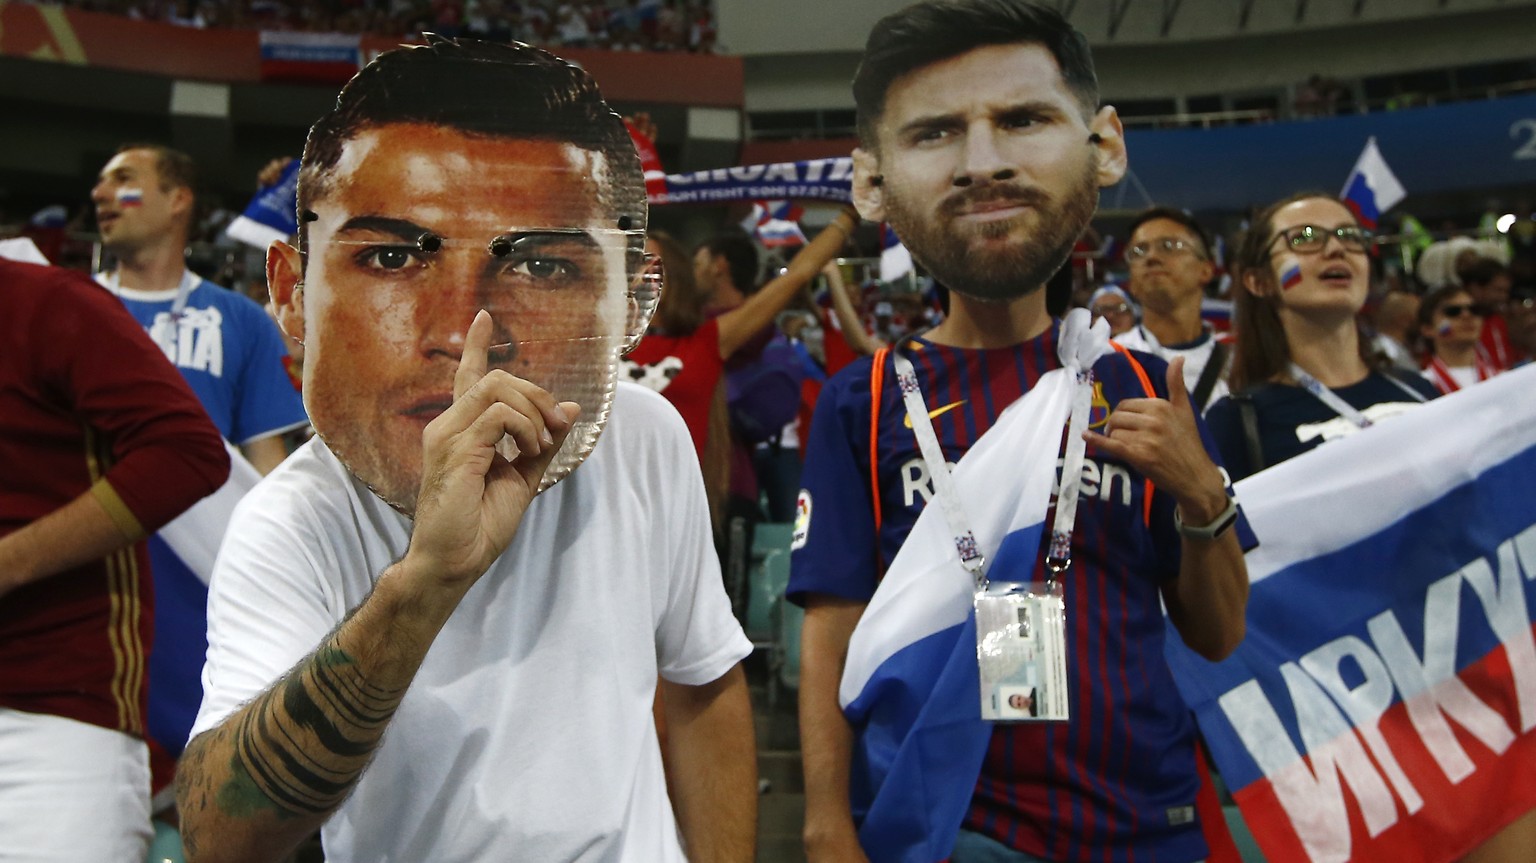 Fans wear masks with the face of the Portuguese national soccer star Cristiano Ronaldo and Argentina national soccer star Lionel Messi prior to the start of the quarterfinal match between Russia and C ...